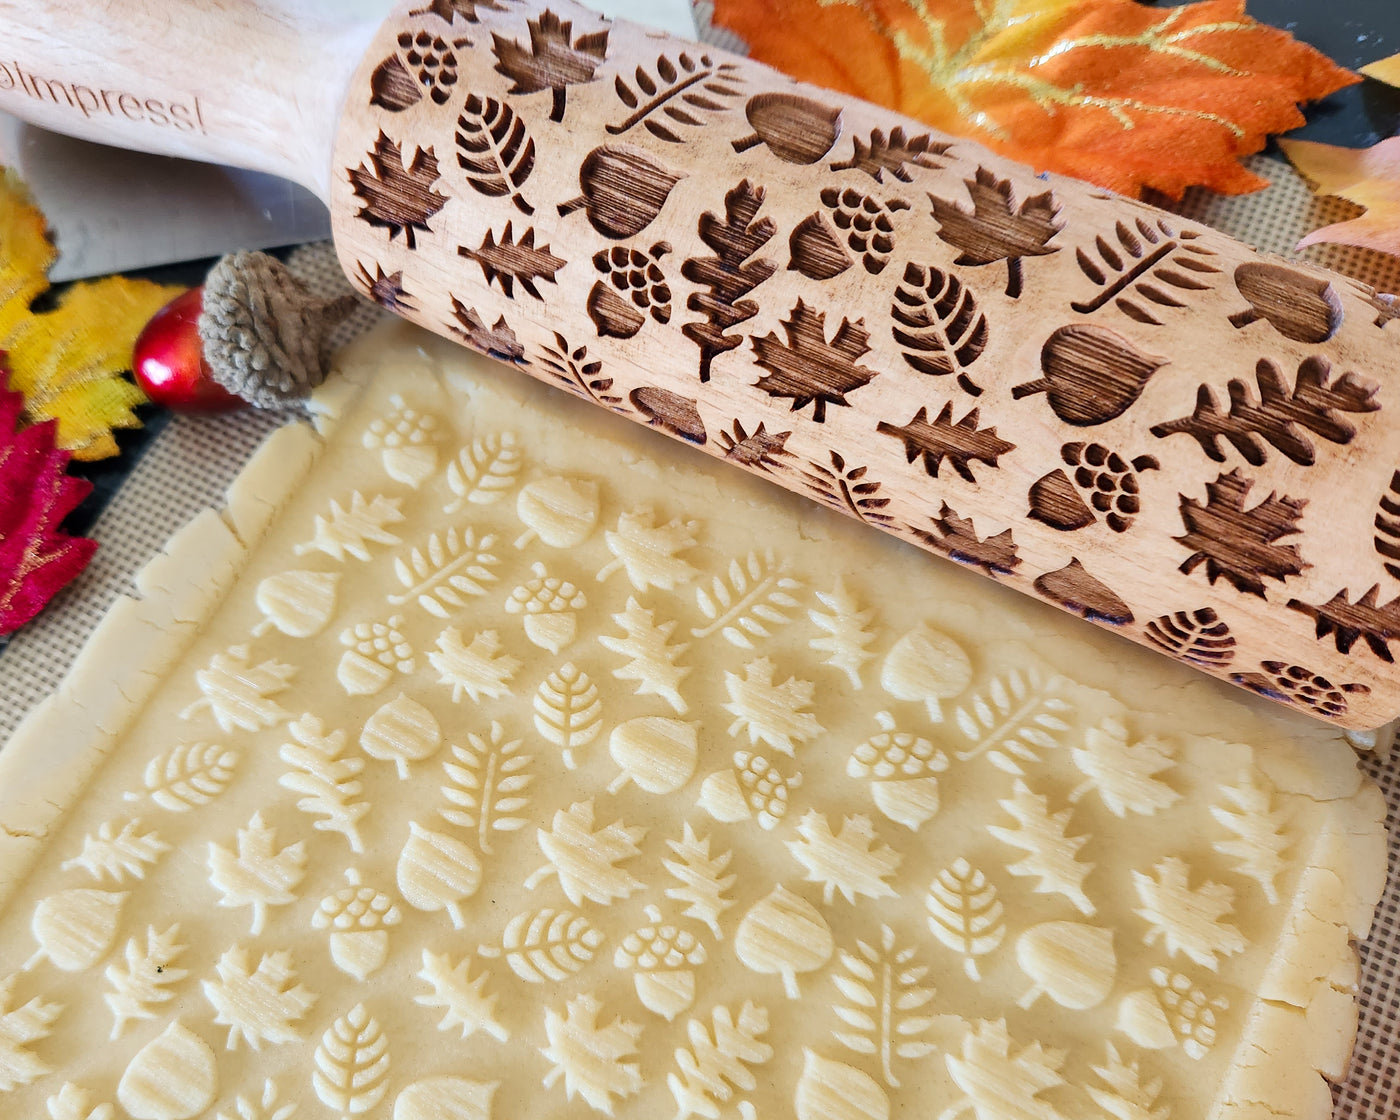 Caring and Cleaning for Your Wooden Rolling Pin